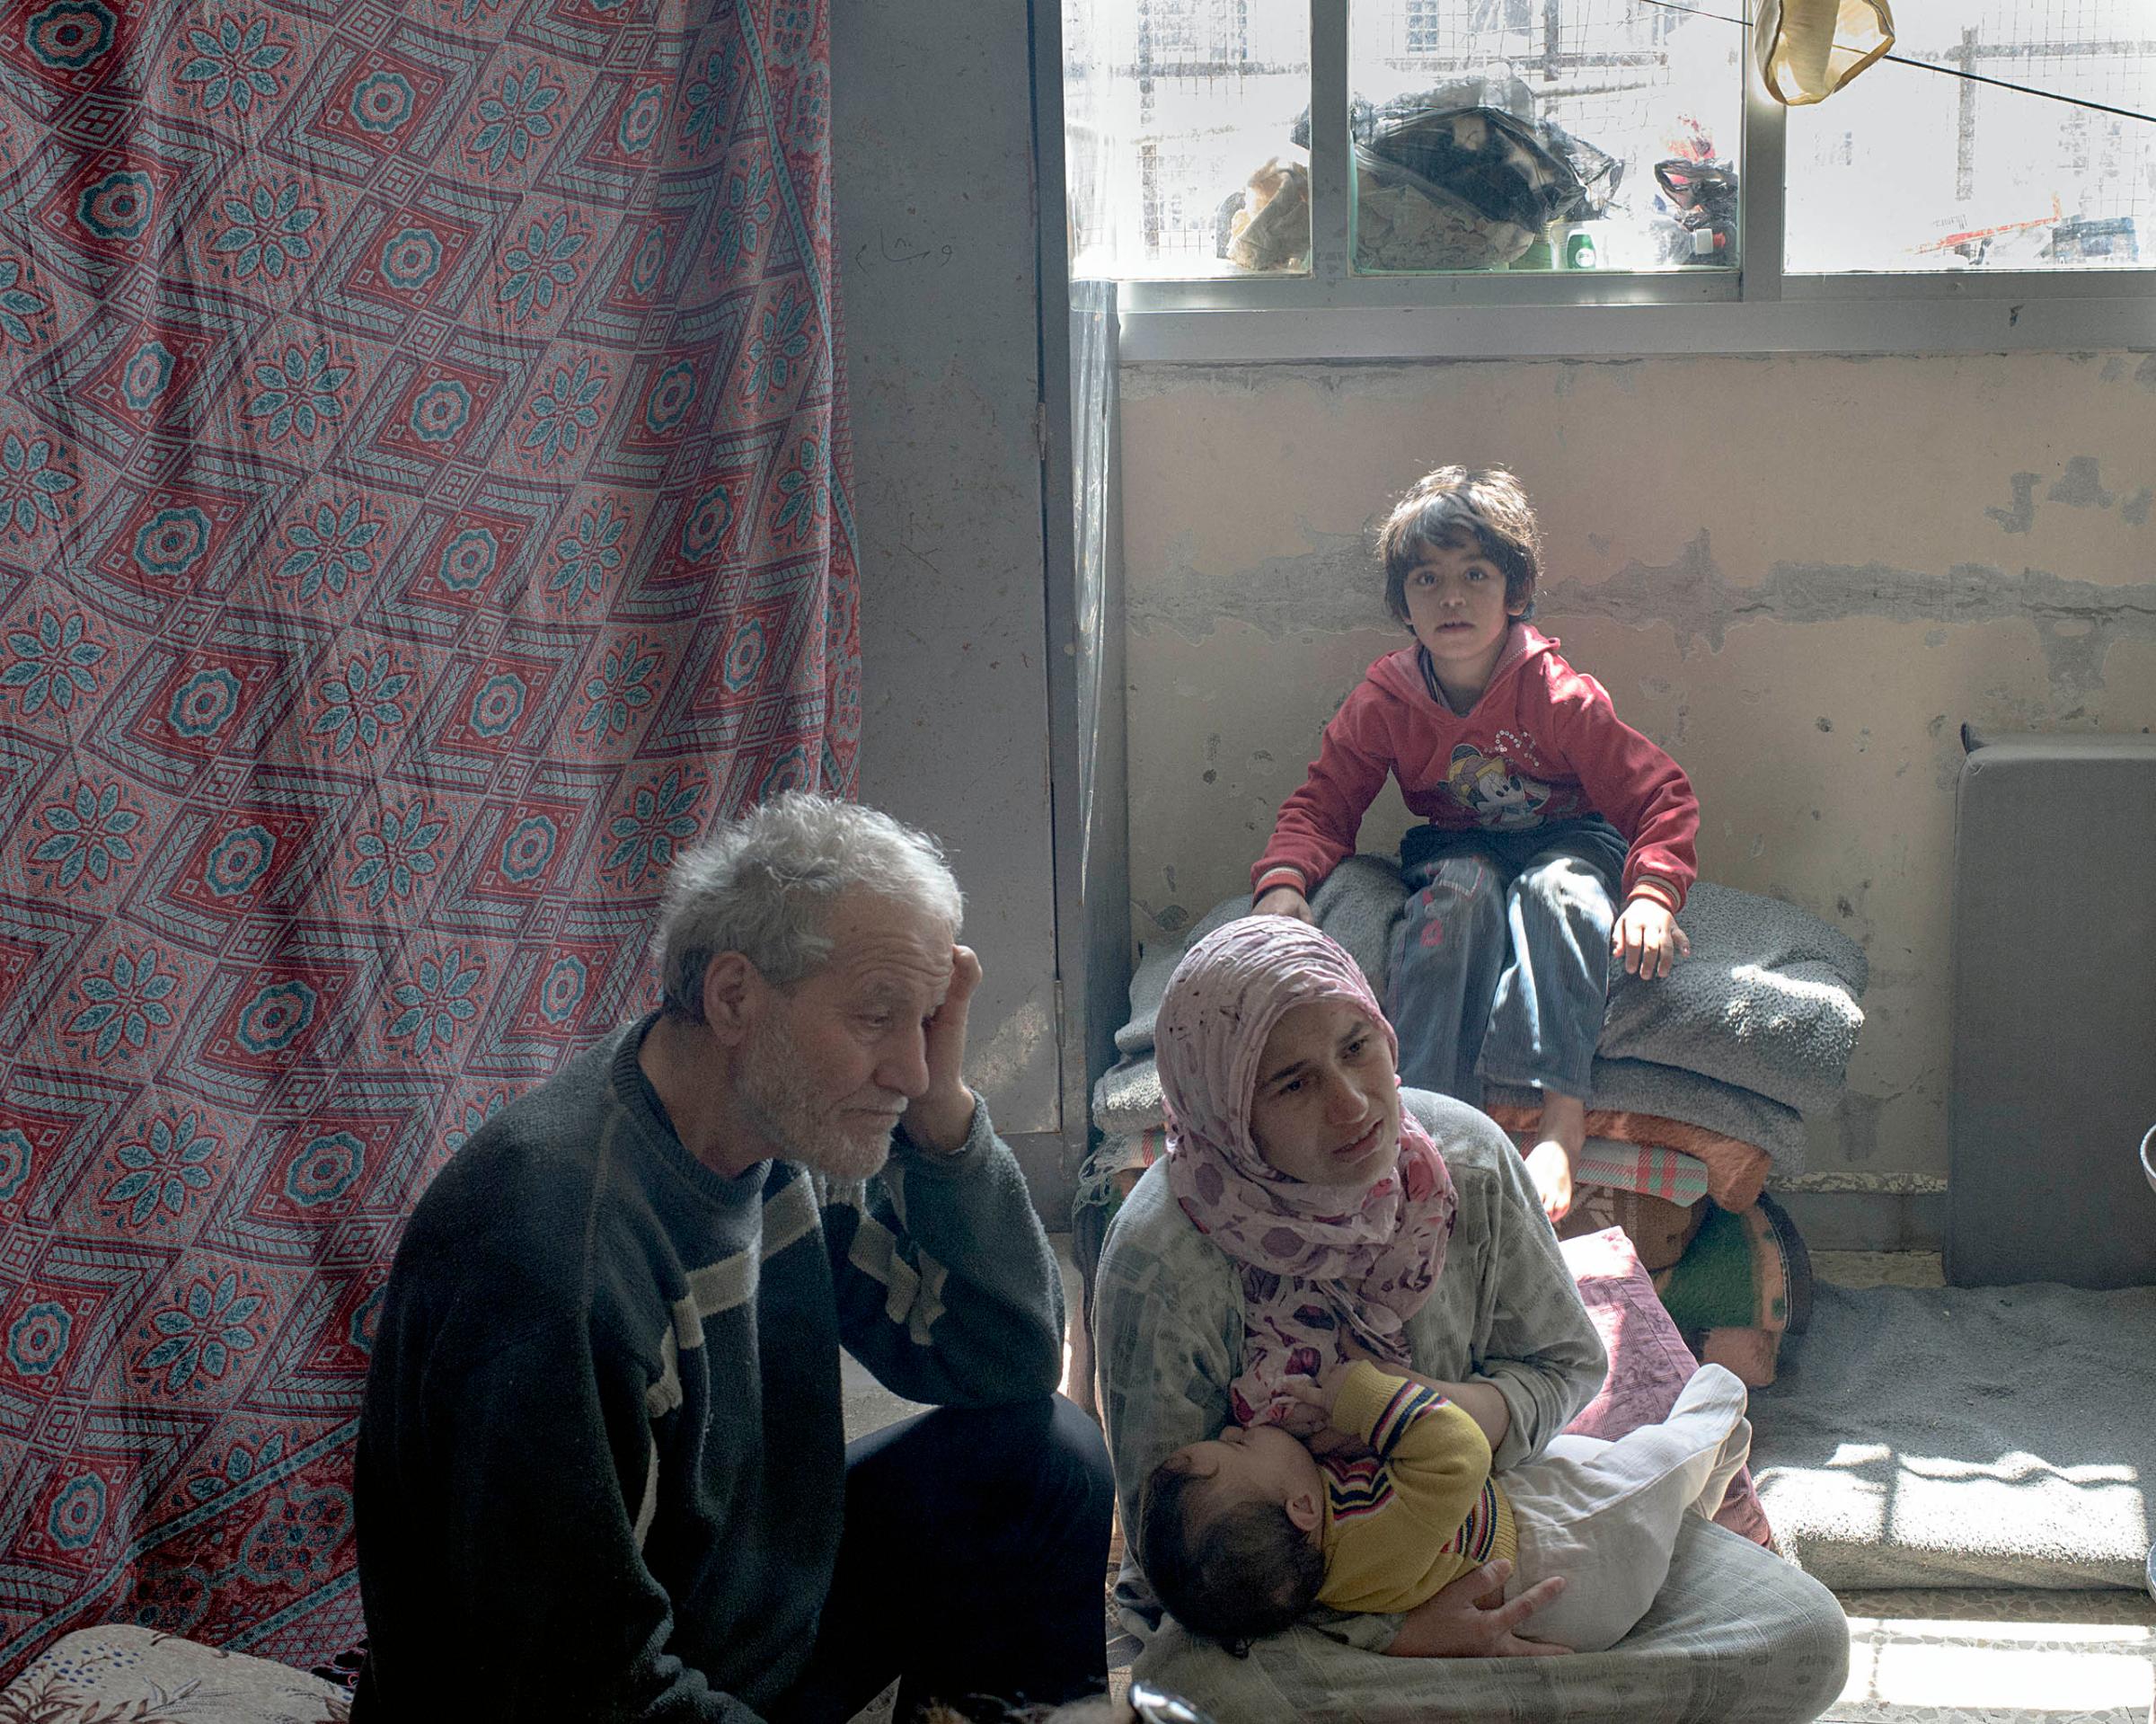 Internally displaced persons live in a former school, converted into a refugee center by the Syrian Arab Red Crescent, in the Bab Amr district of Homs, Syria, March 2016.